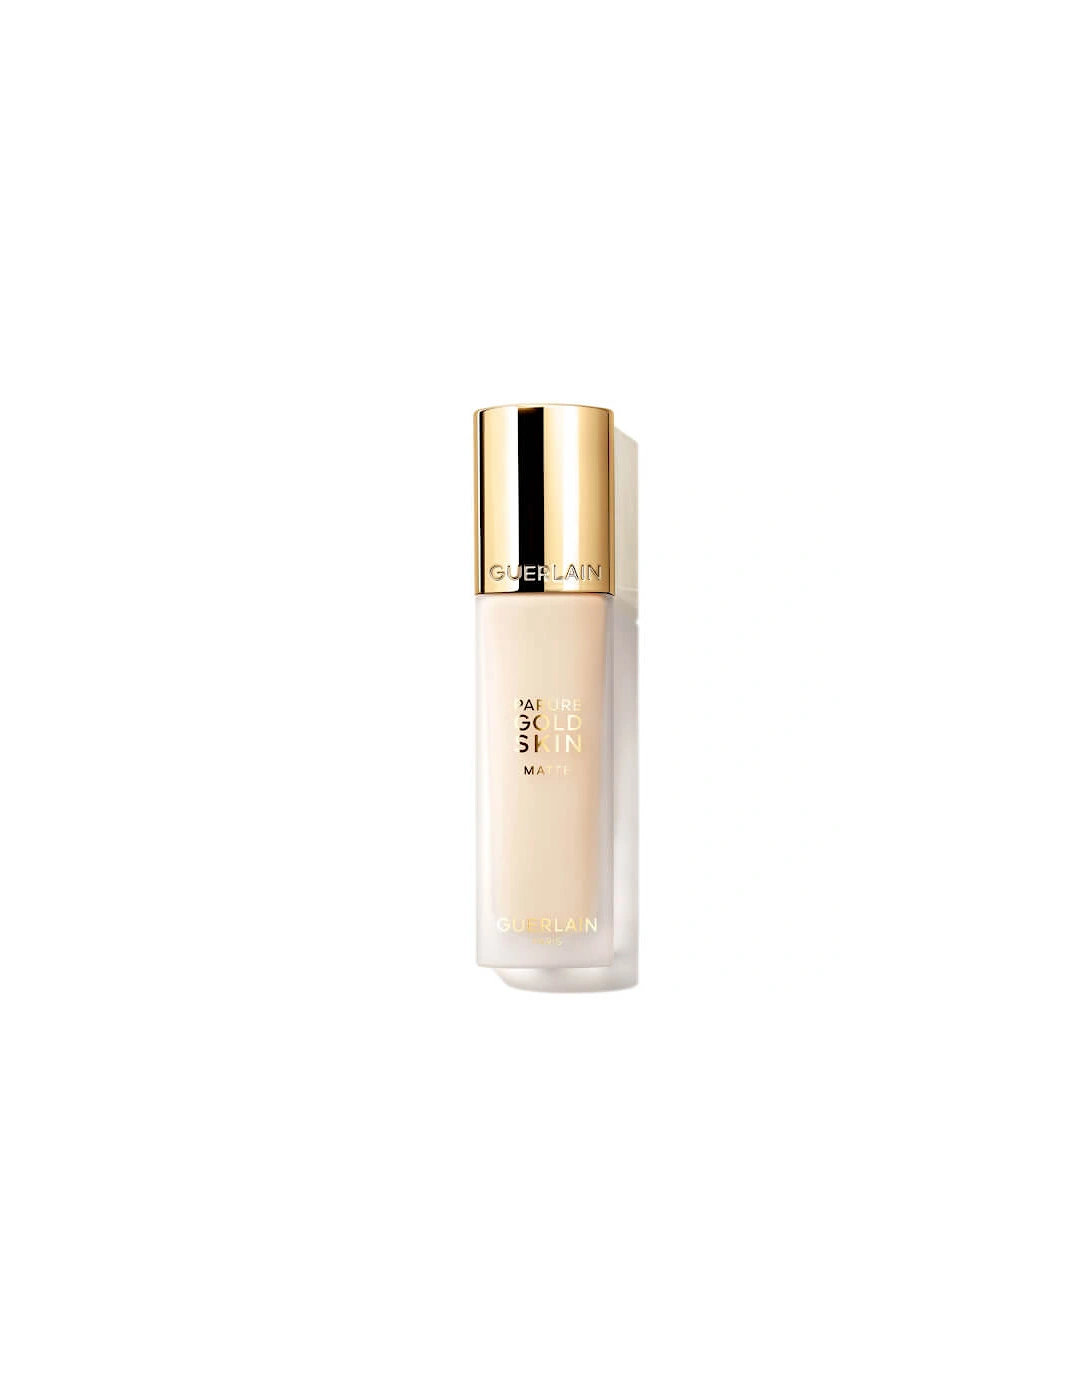 Parure Gold Skin 24H No-Transfer High Perfection Foundation - 0.5W Warm / Doré, 2 of 1